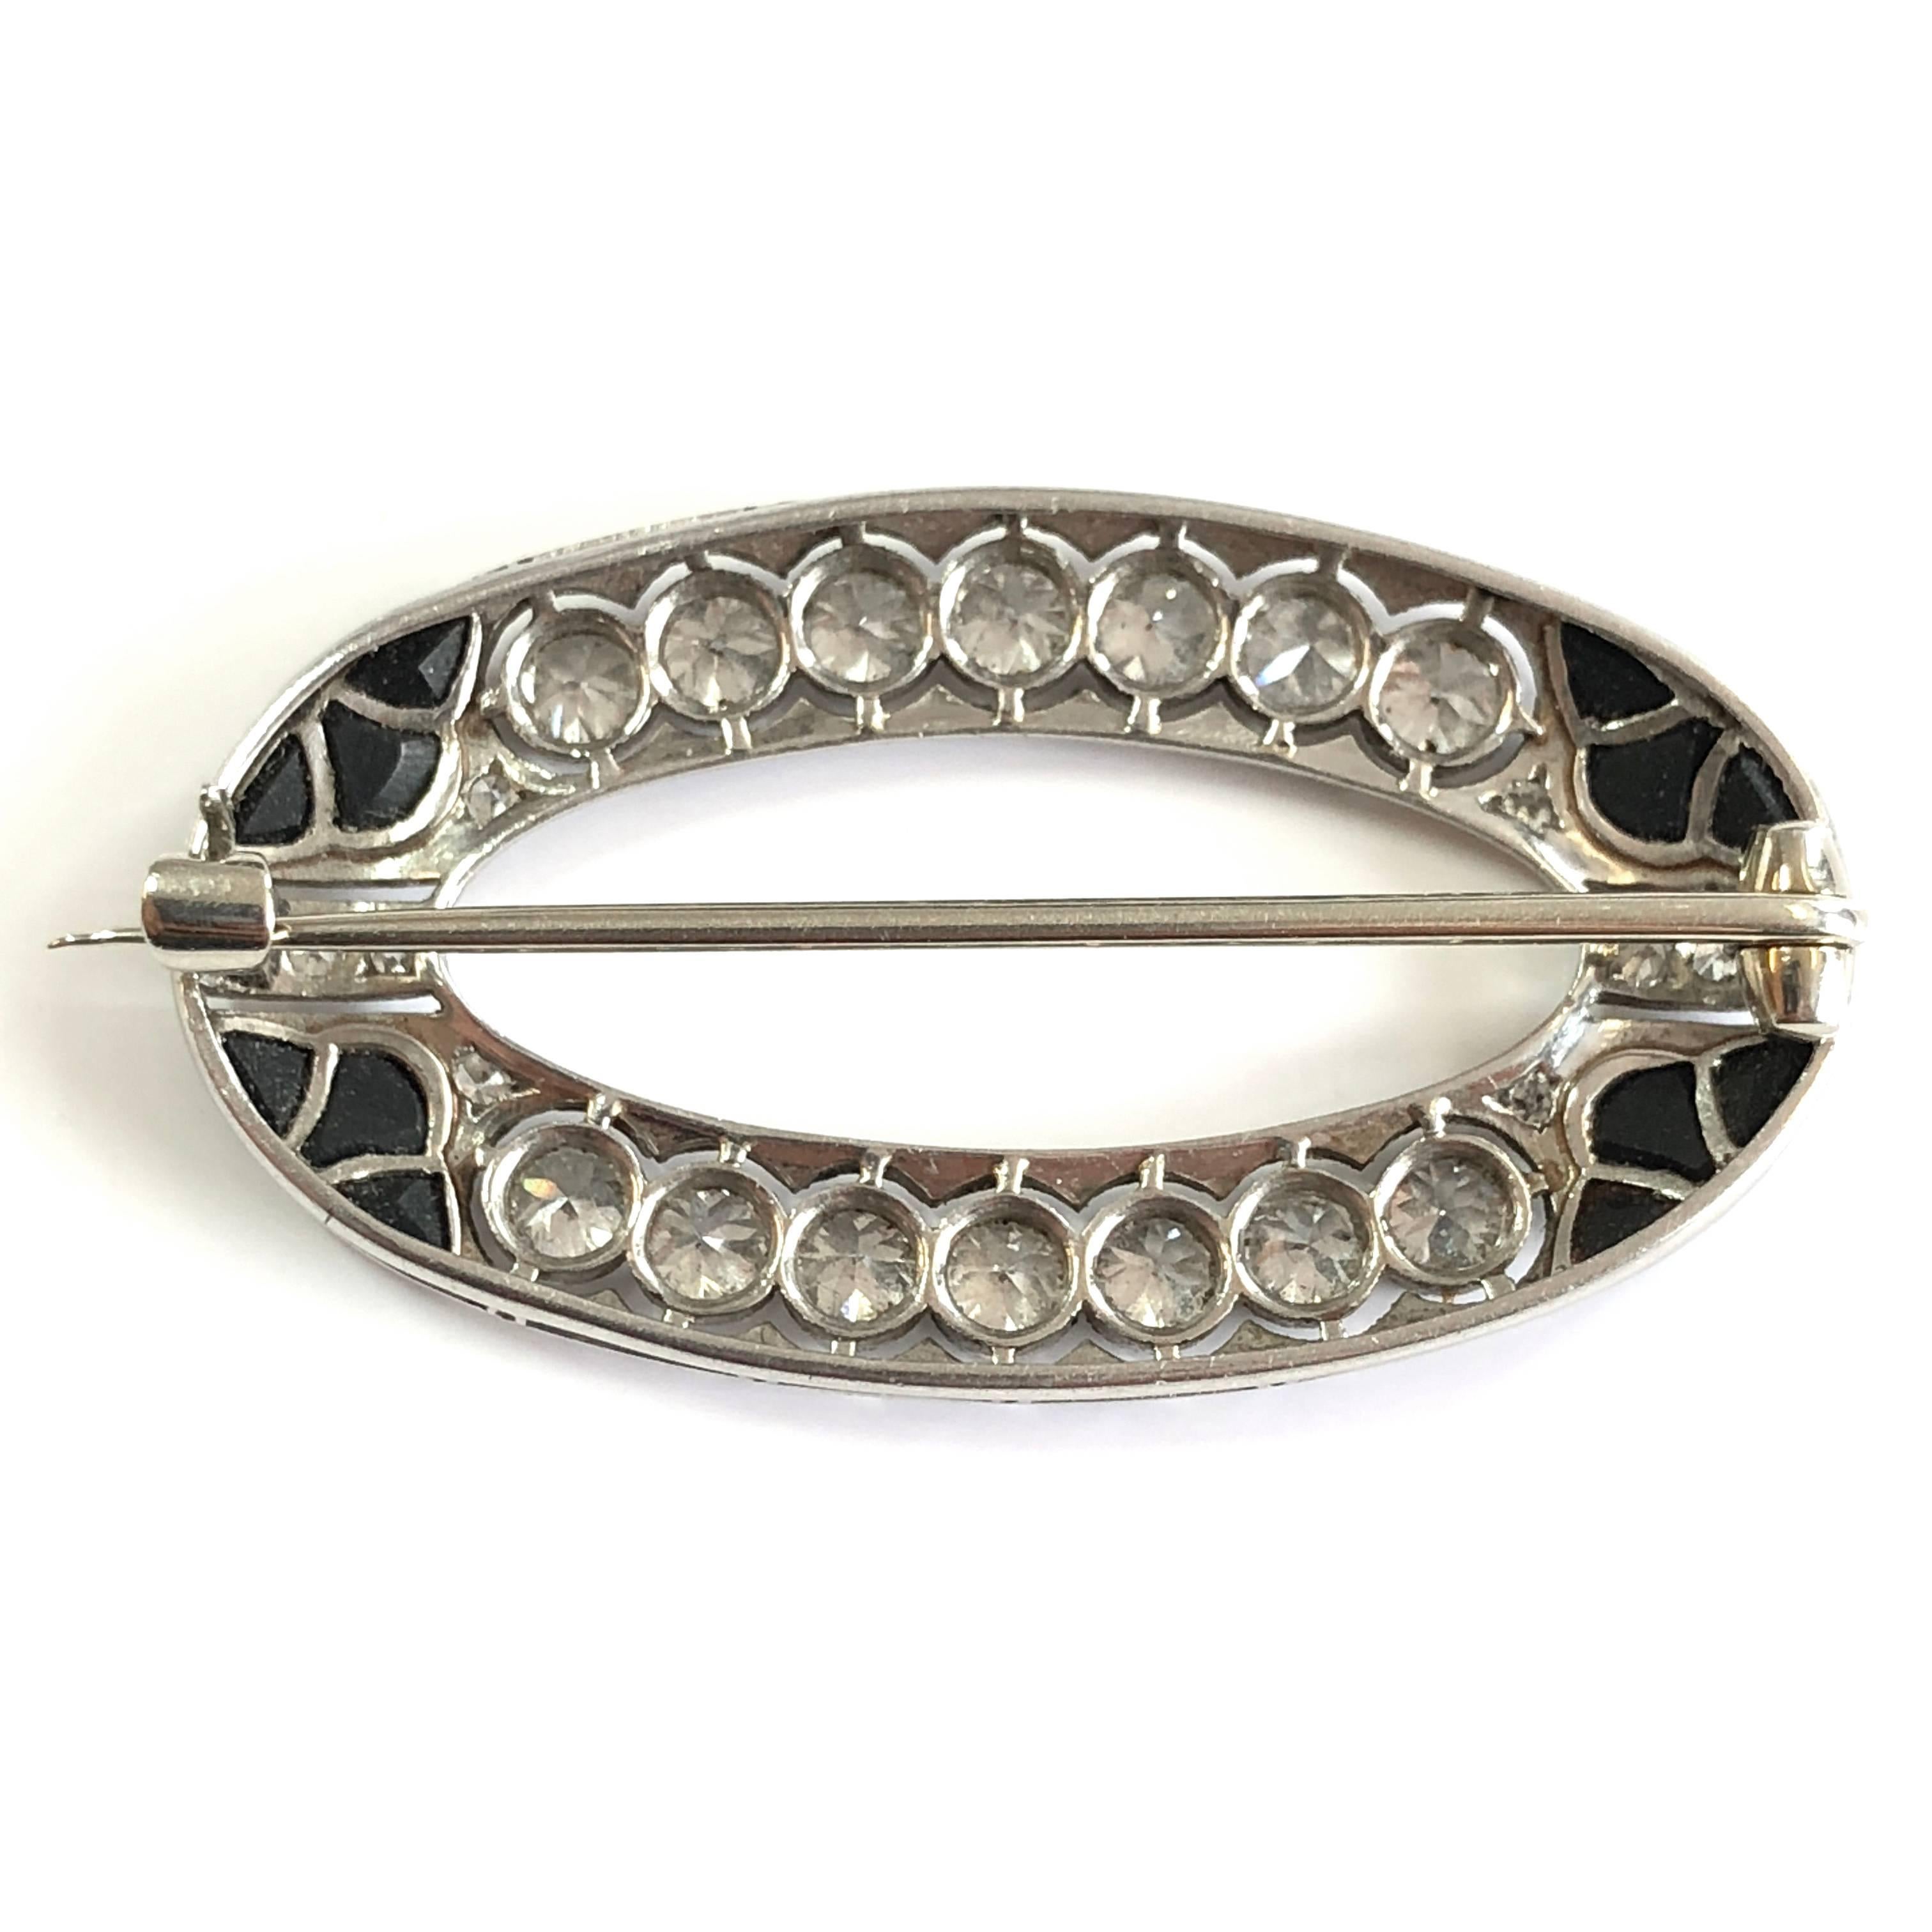 A very pretty Art Deco brooch with onyx and diamonds, ca. 1920s. The diamonds weigh circa 2 carats.